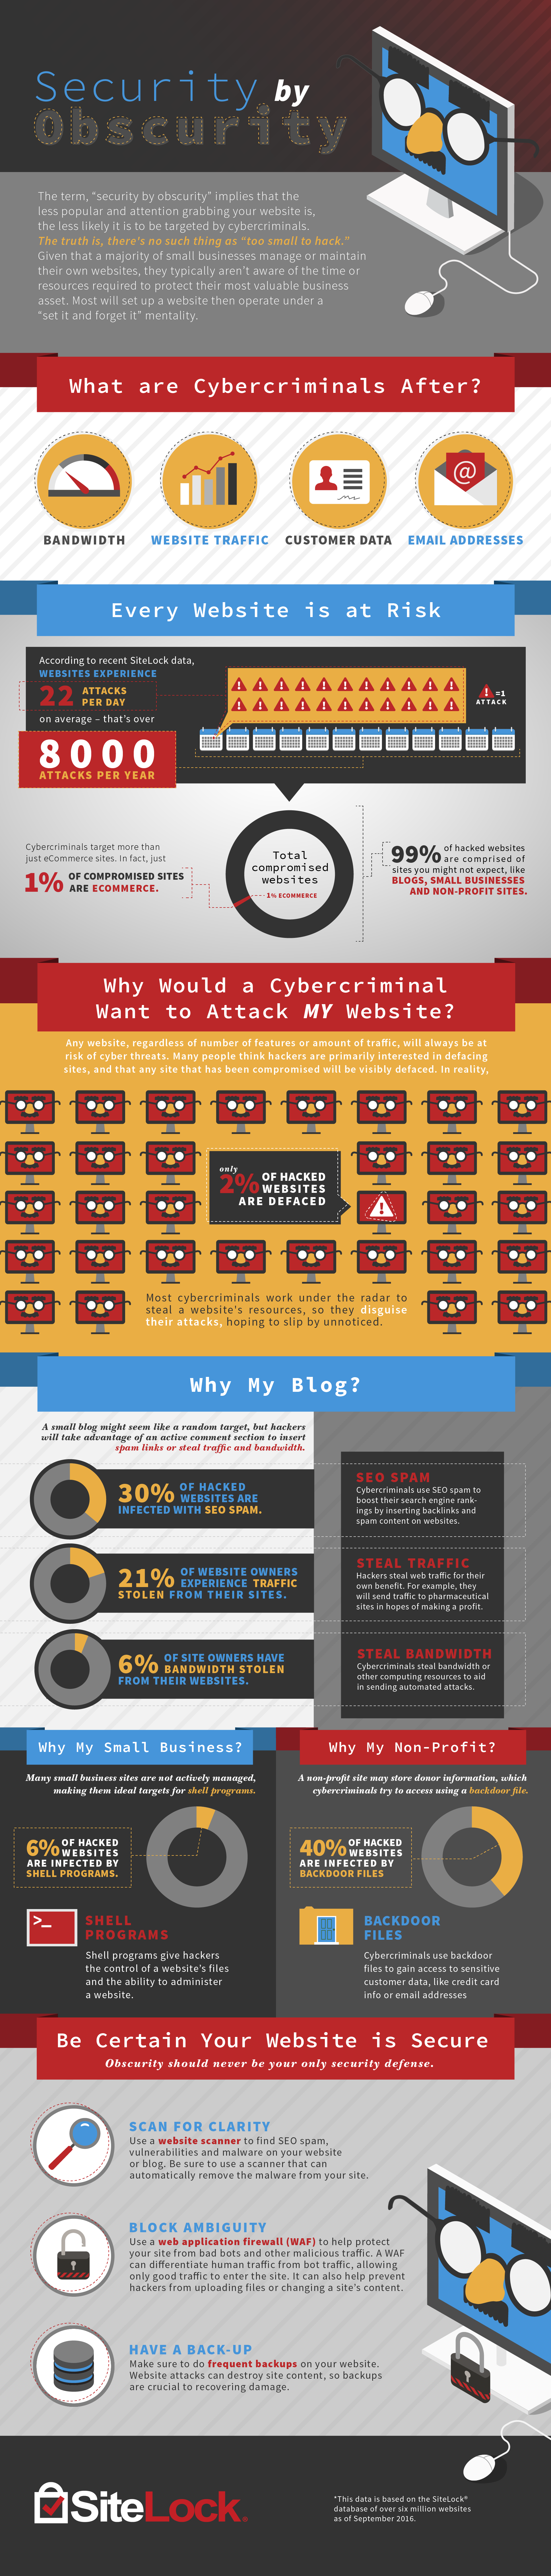 SiteLock Security by Obscurity Infographic